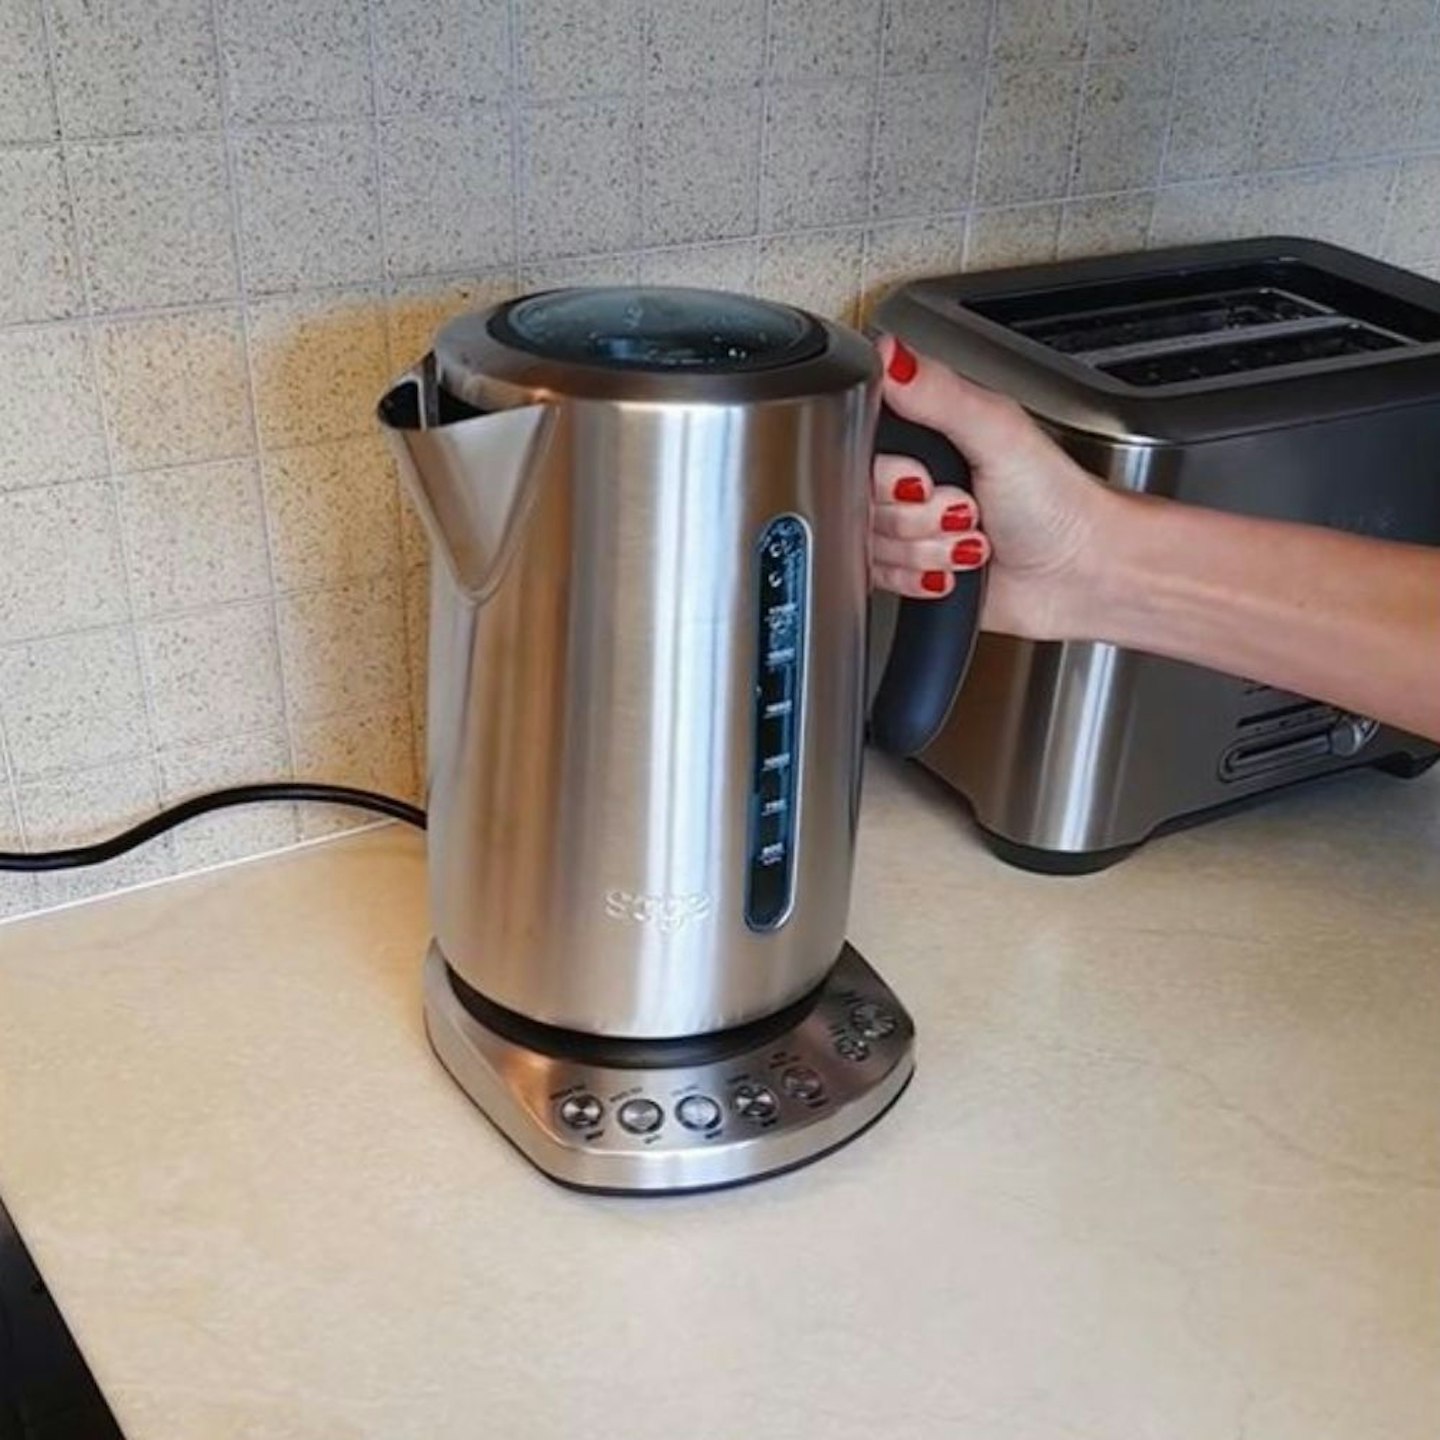 Sage The Smart Kettle tested